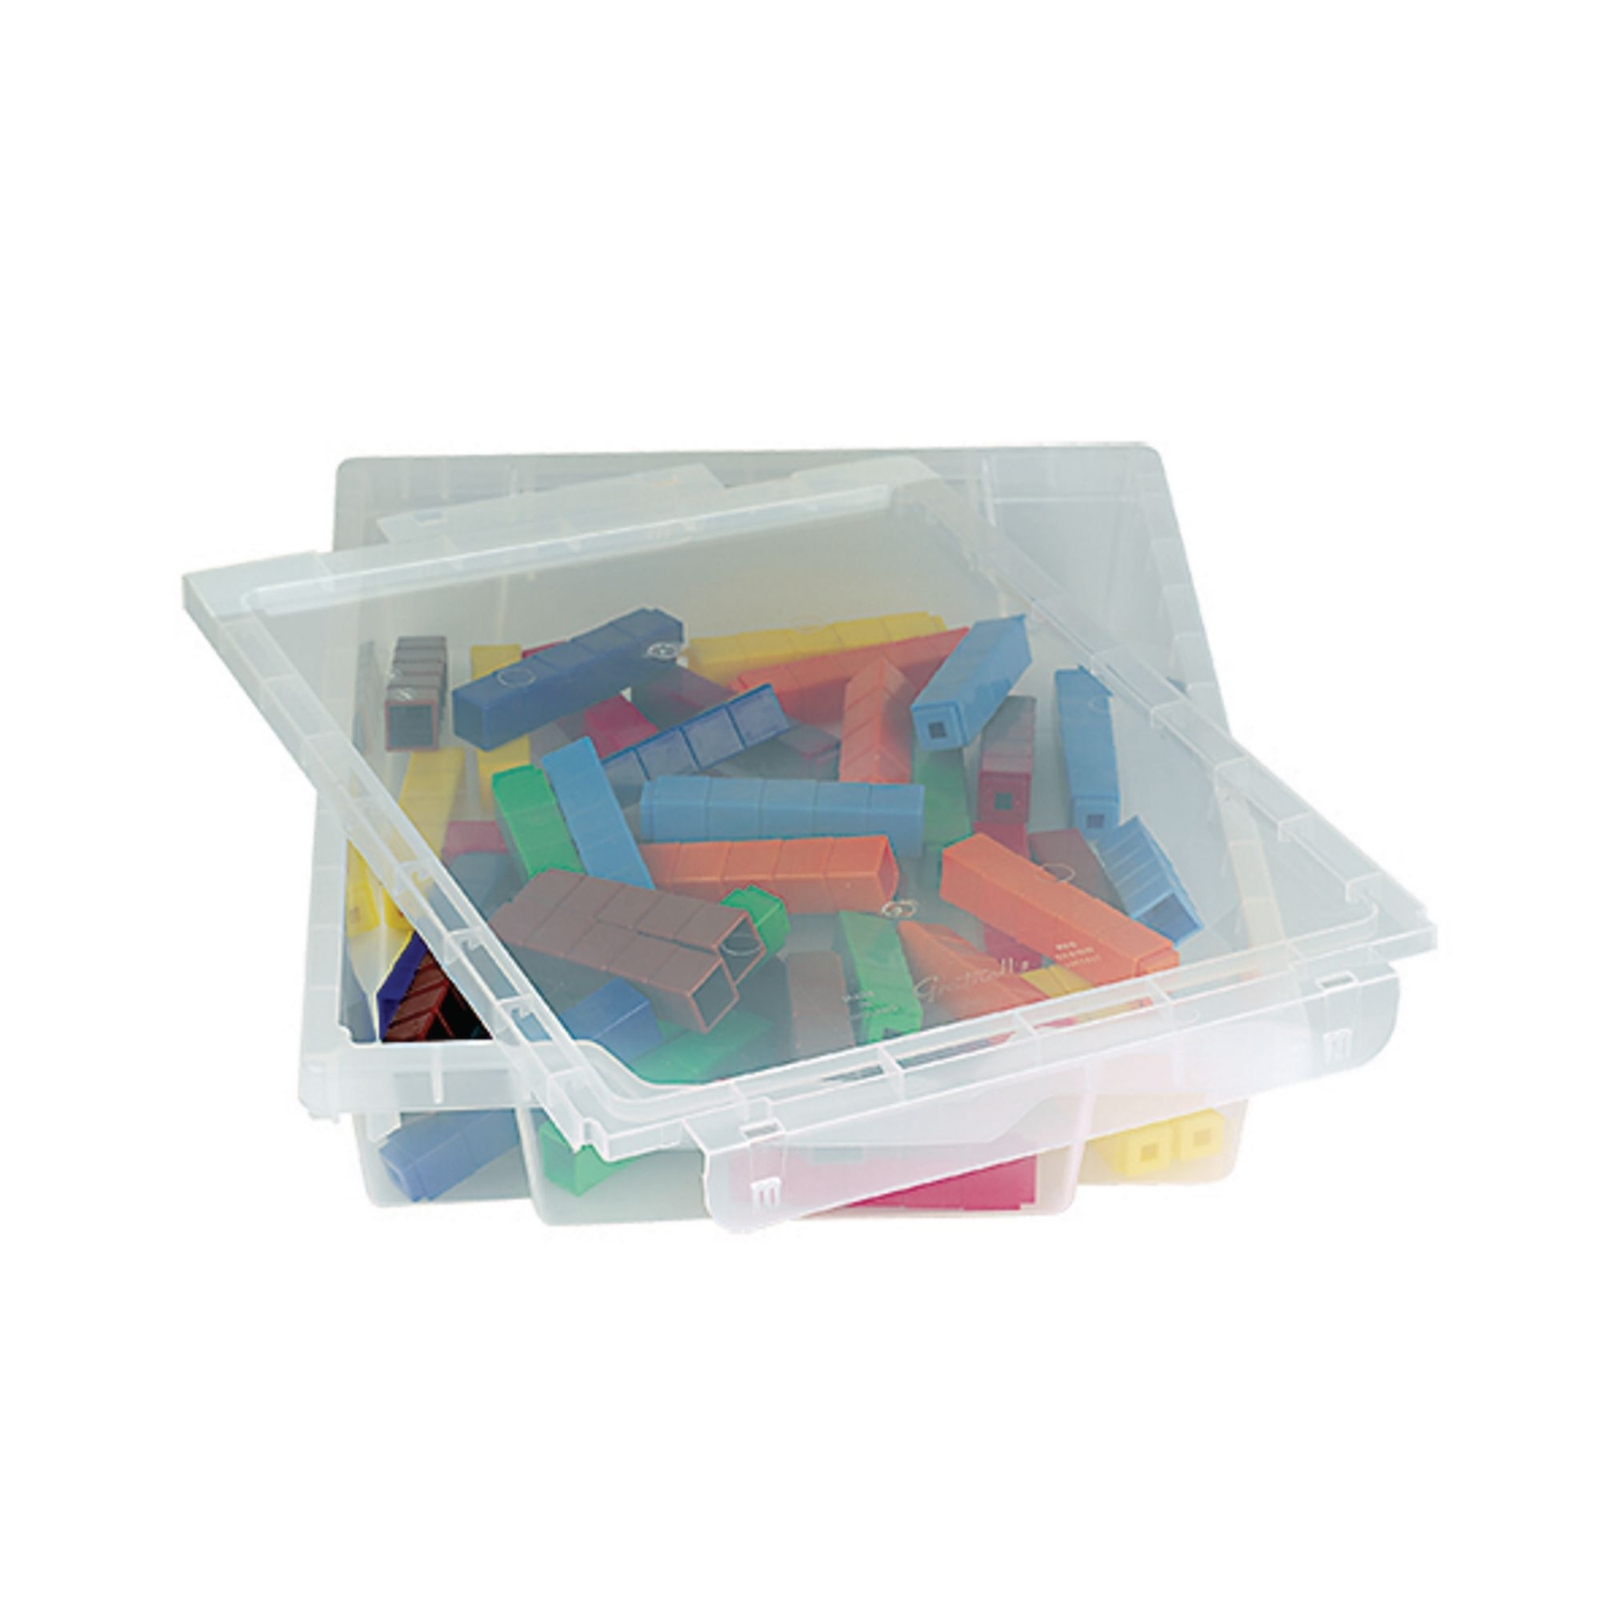 Gratnell Translucent Antimicrobial Lid for Antimicrobial Trays - Each